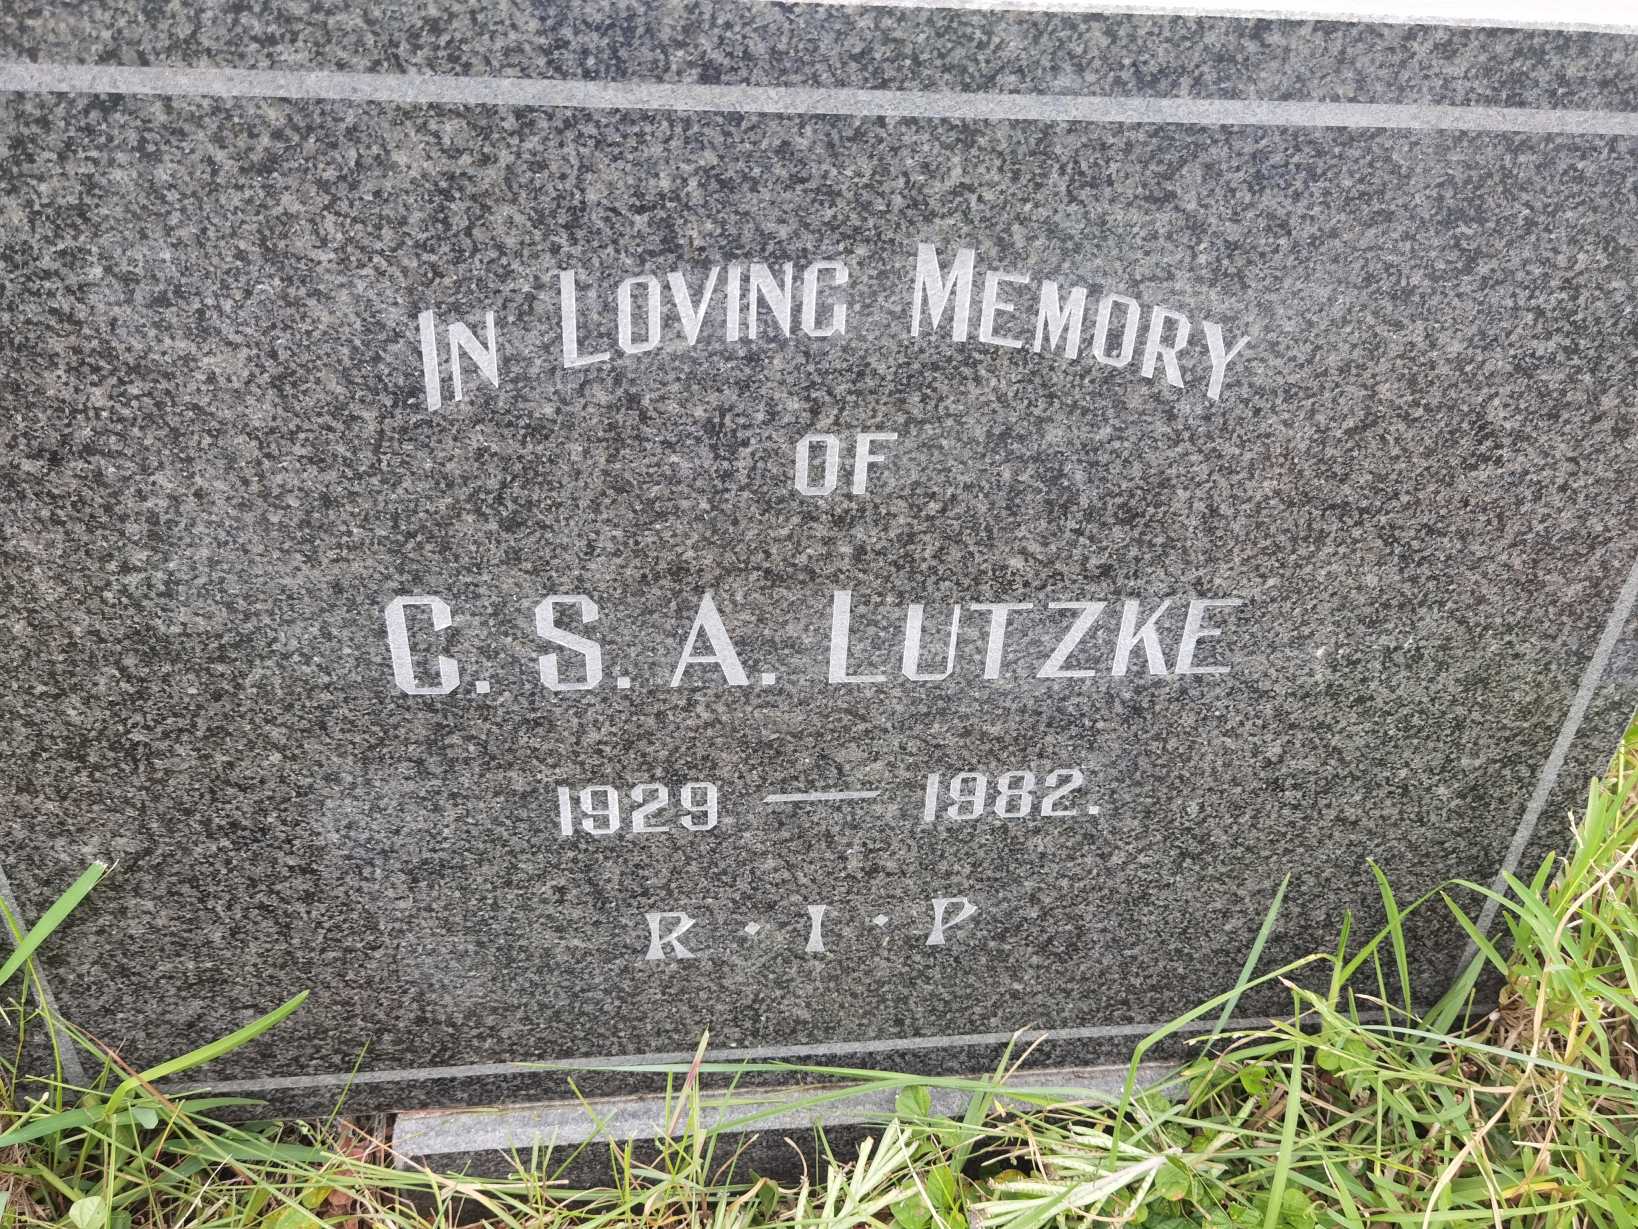 LUTZKE C.S.A. 1929-1982